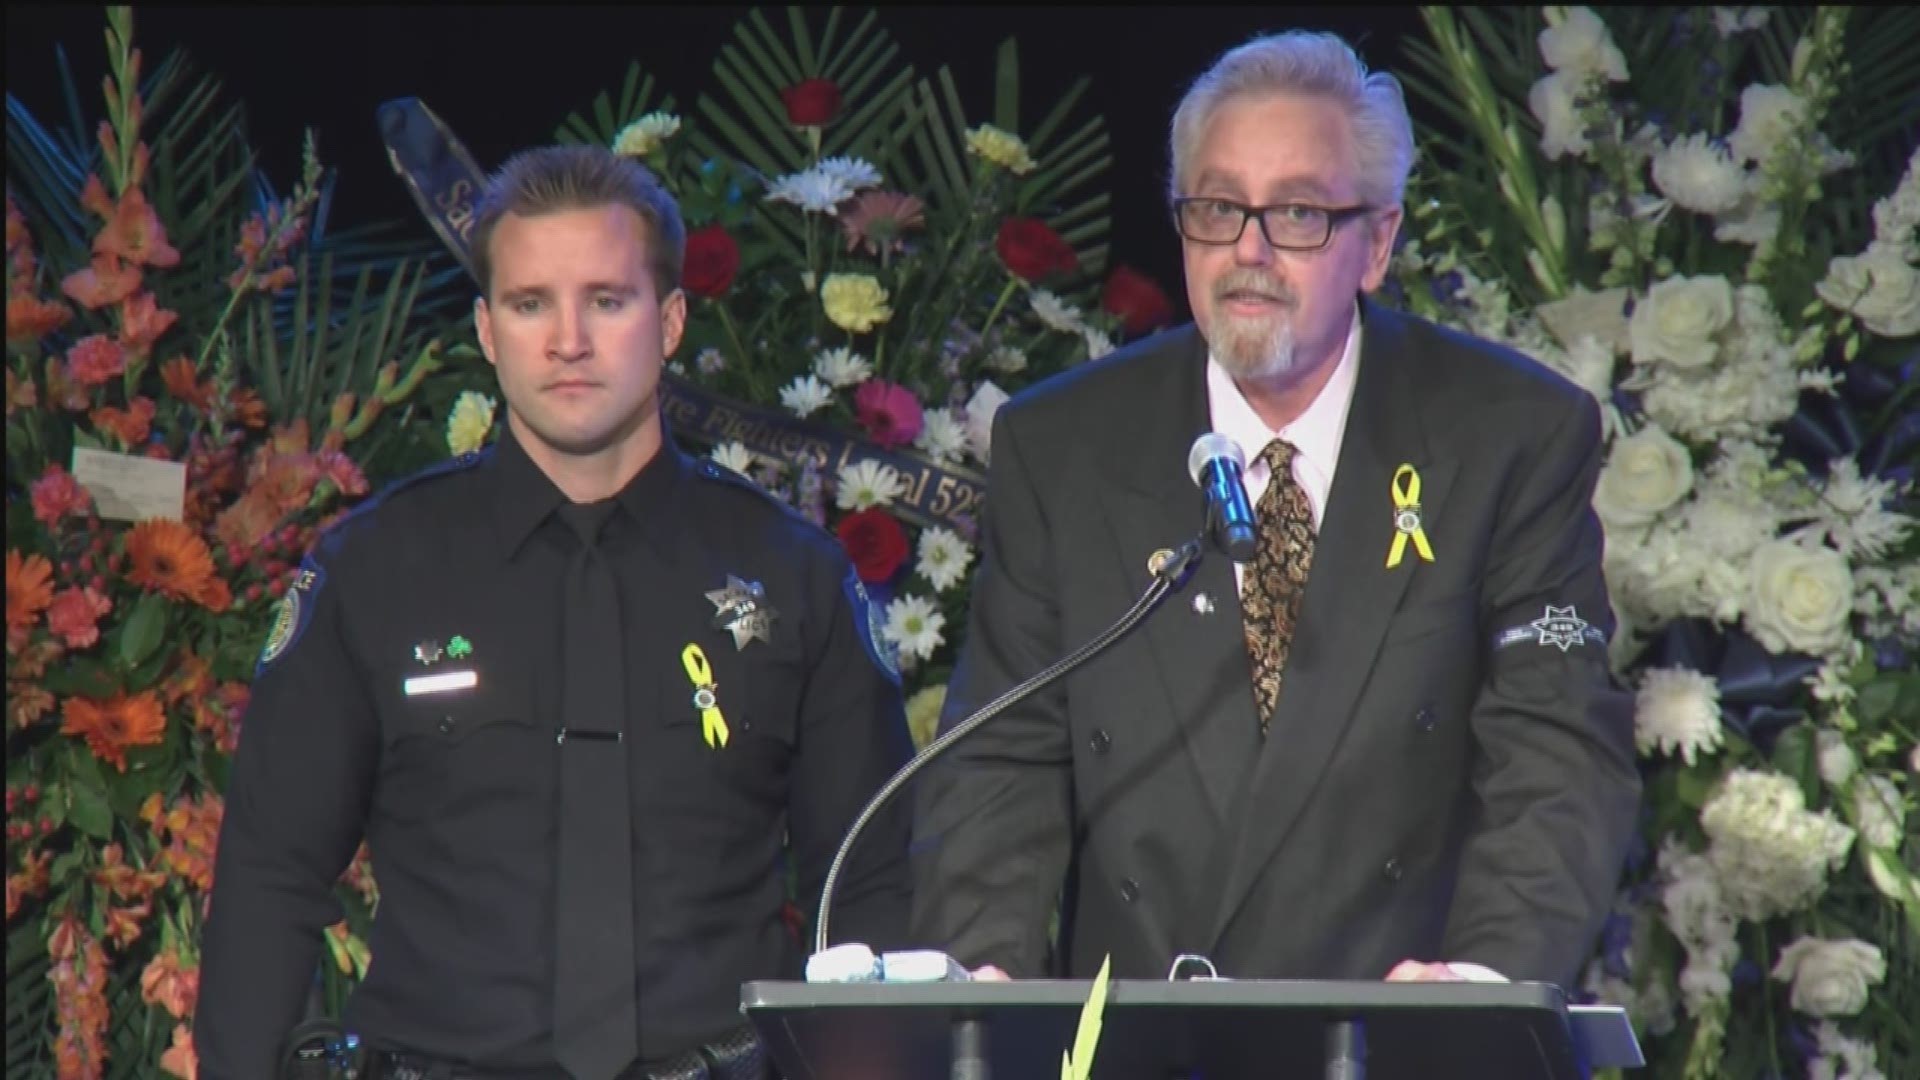 At the memorial service for Sacramento Police Officer Tara O'Sullivan, her godfather, Gary Roush, gave a personal eulogy. Roush talked about Tara's strong character and her love for animals.